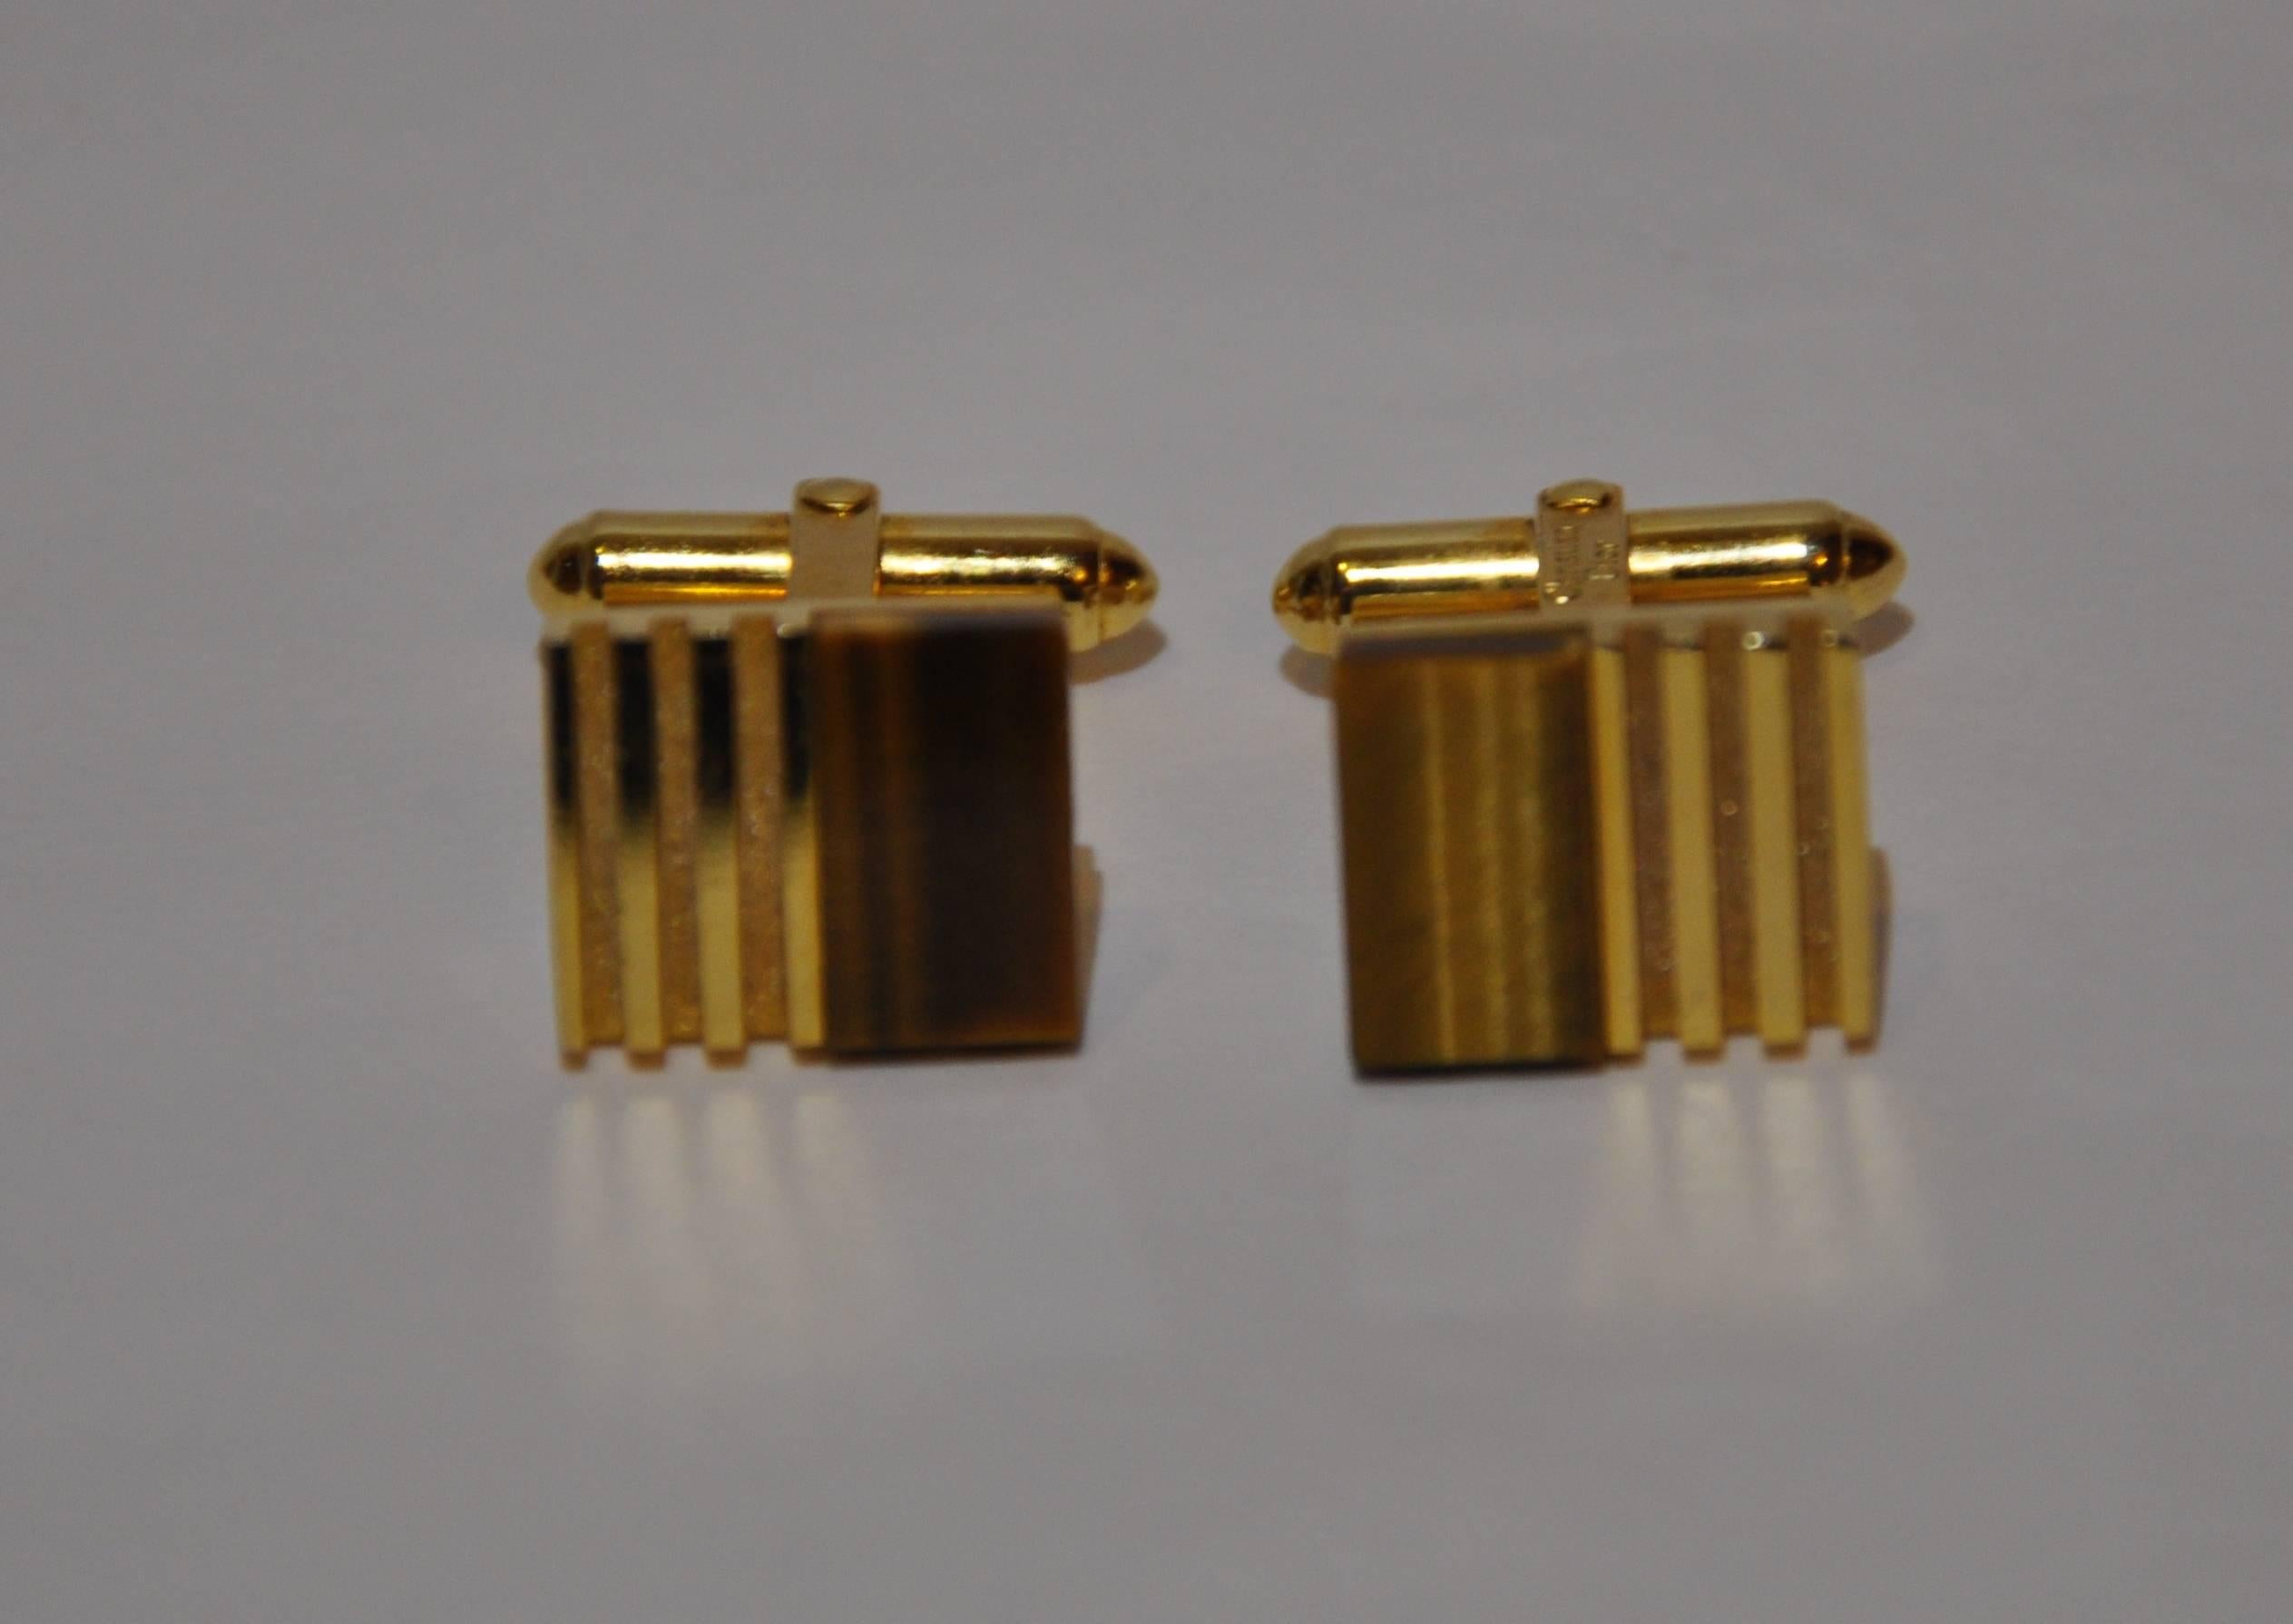        Christian Dior wonderfully elegant men's polished gold tone vermeil finished hardware cufflinks are accented with "Tiger Eye" stone. Etched with their signature name Christian Dior, these measures 5/8" x 1/2", and a depth